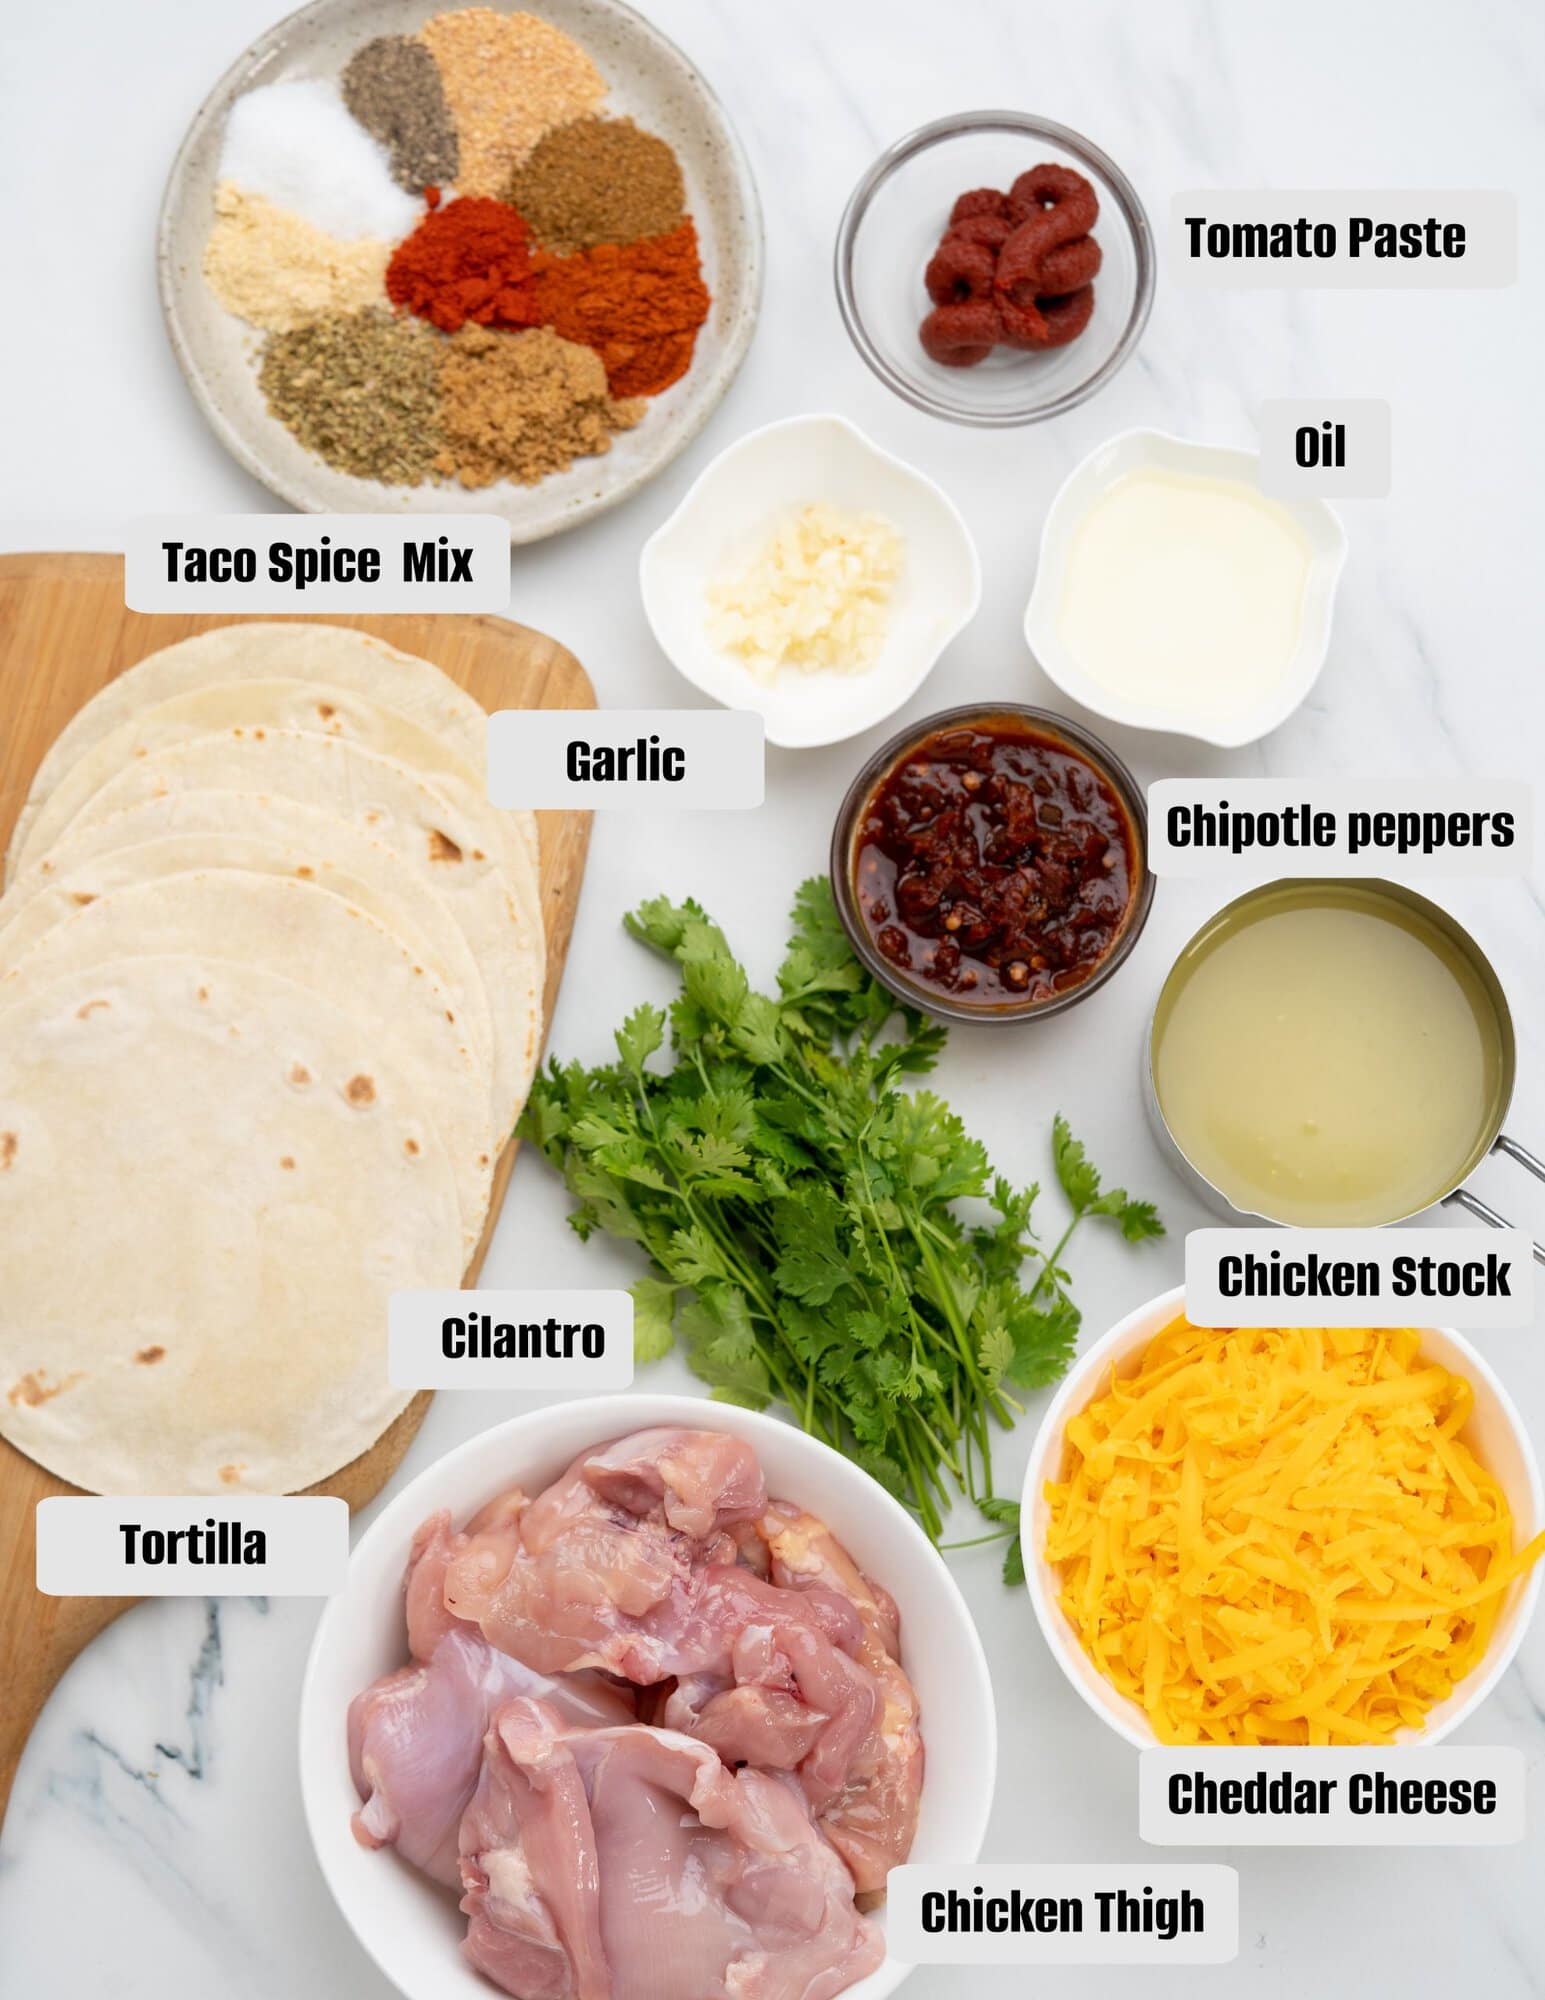 List of ingredients needed for homemade Chicken Tacos.